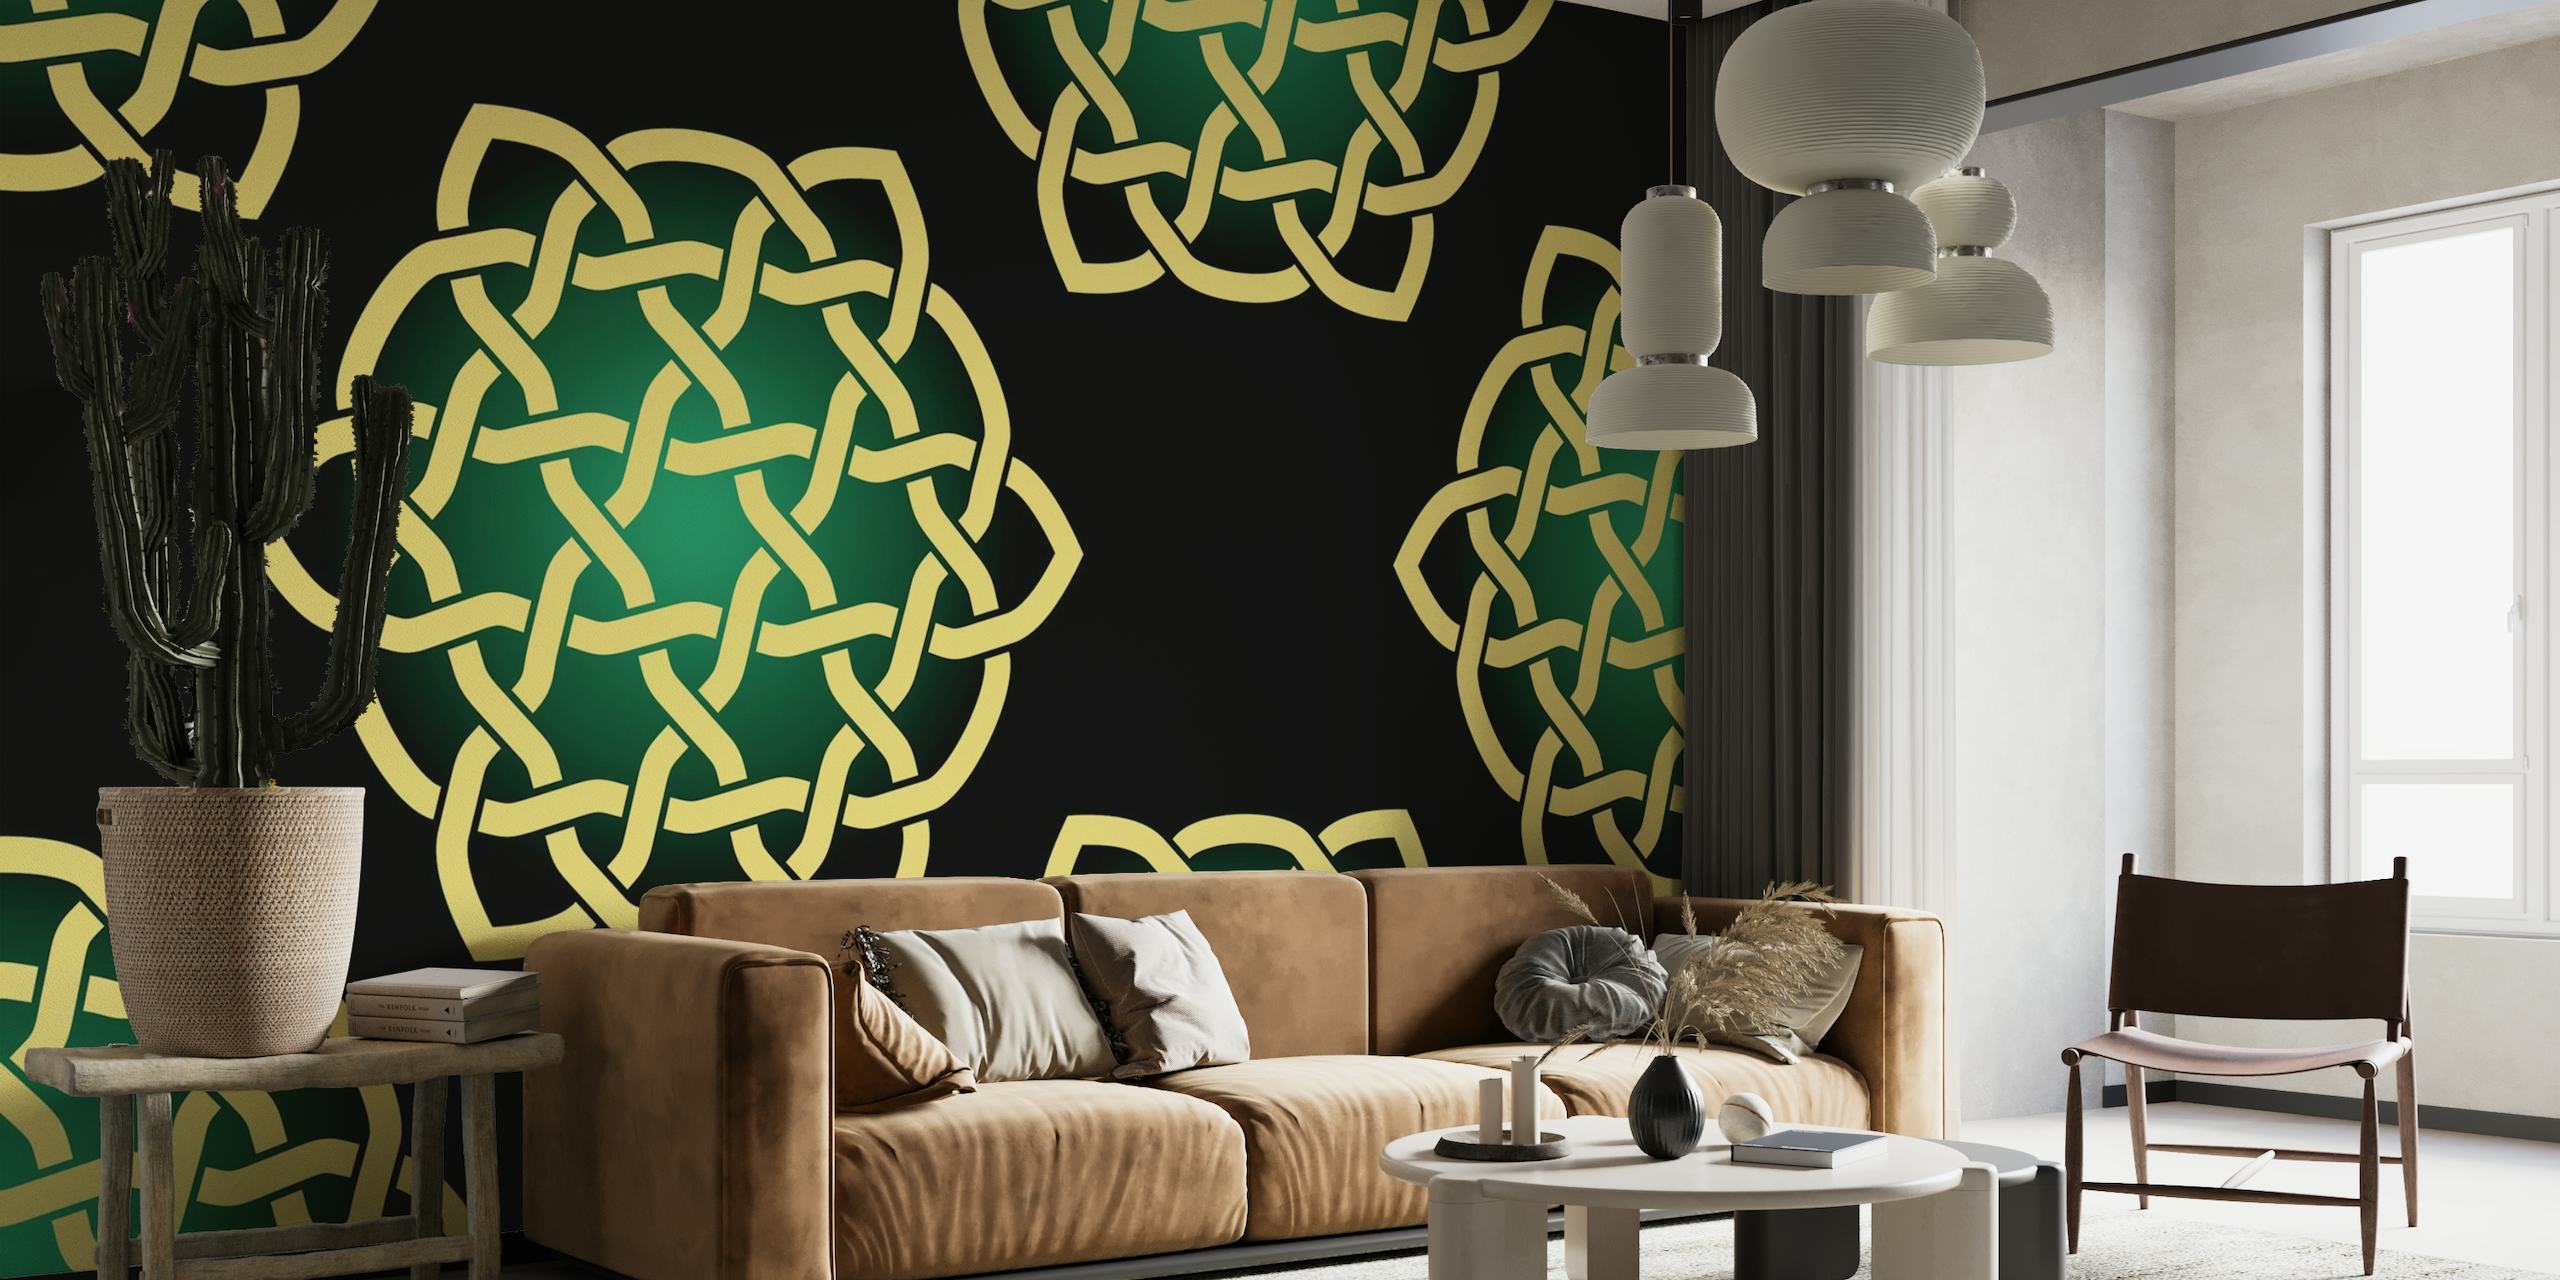 Gold Celtic knot pattern on a dark green background wall mural